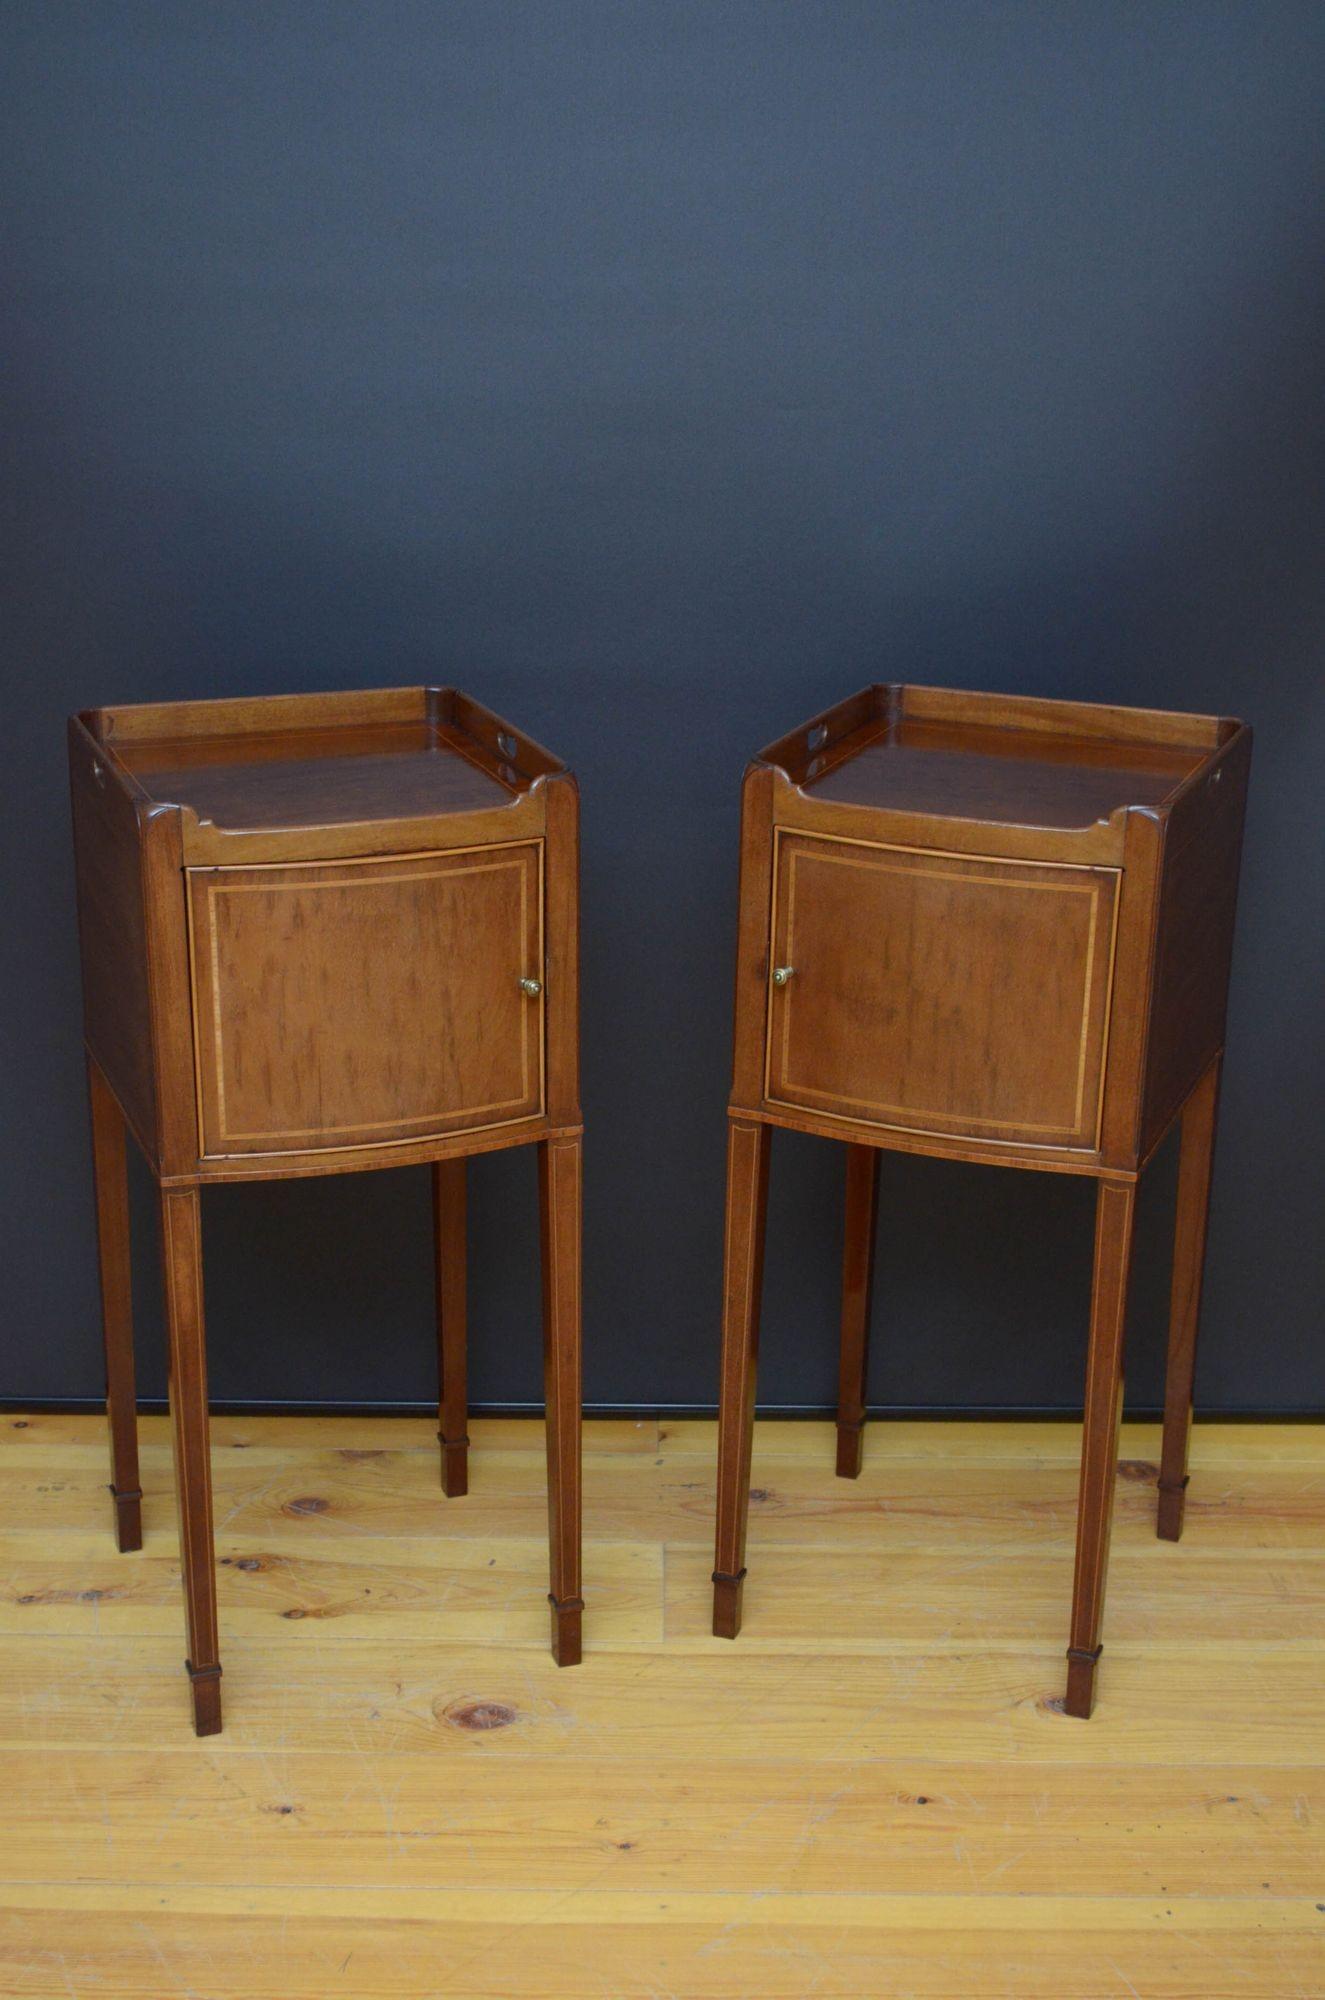 Sn5326 Fine quality pair of tray top bedside cabinets of bow fronted design, each having satinwood string inlaid figured mahogany top and a cockbeaded and string inlaid door fitted with original brass handles, standing on slender string inlaid legs.